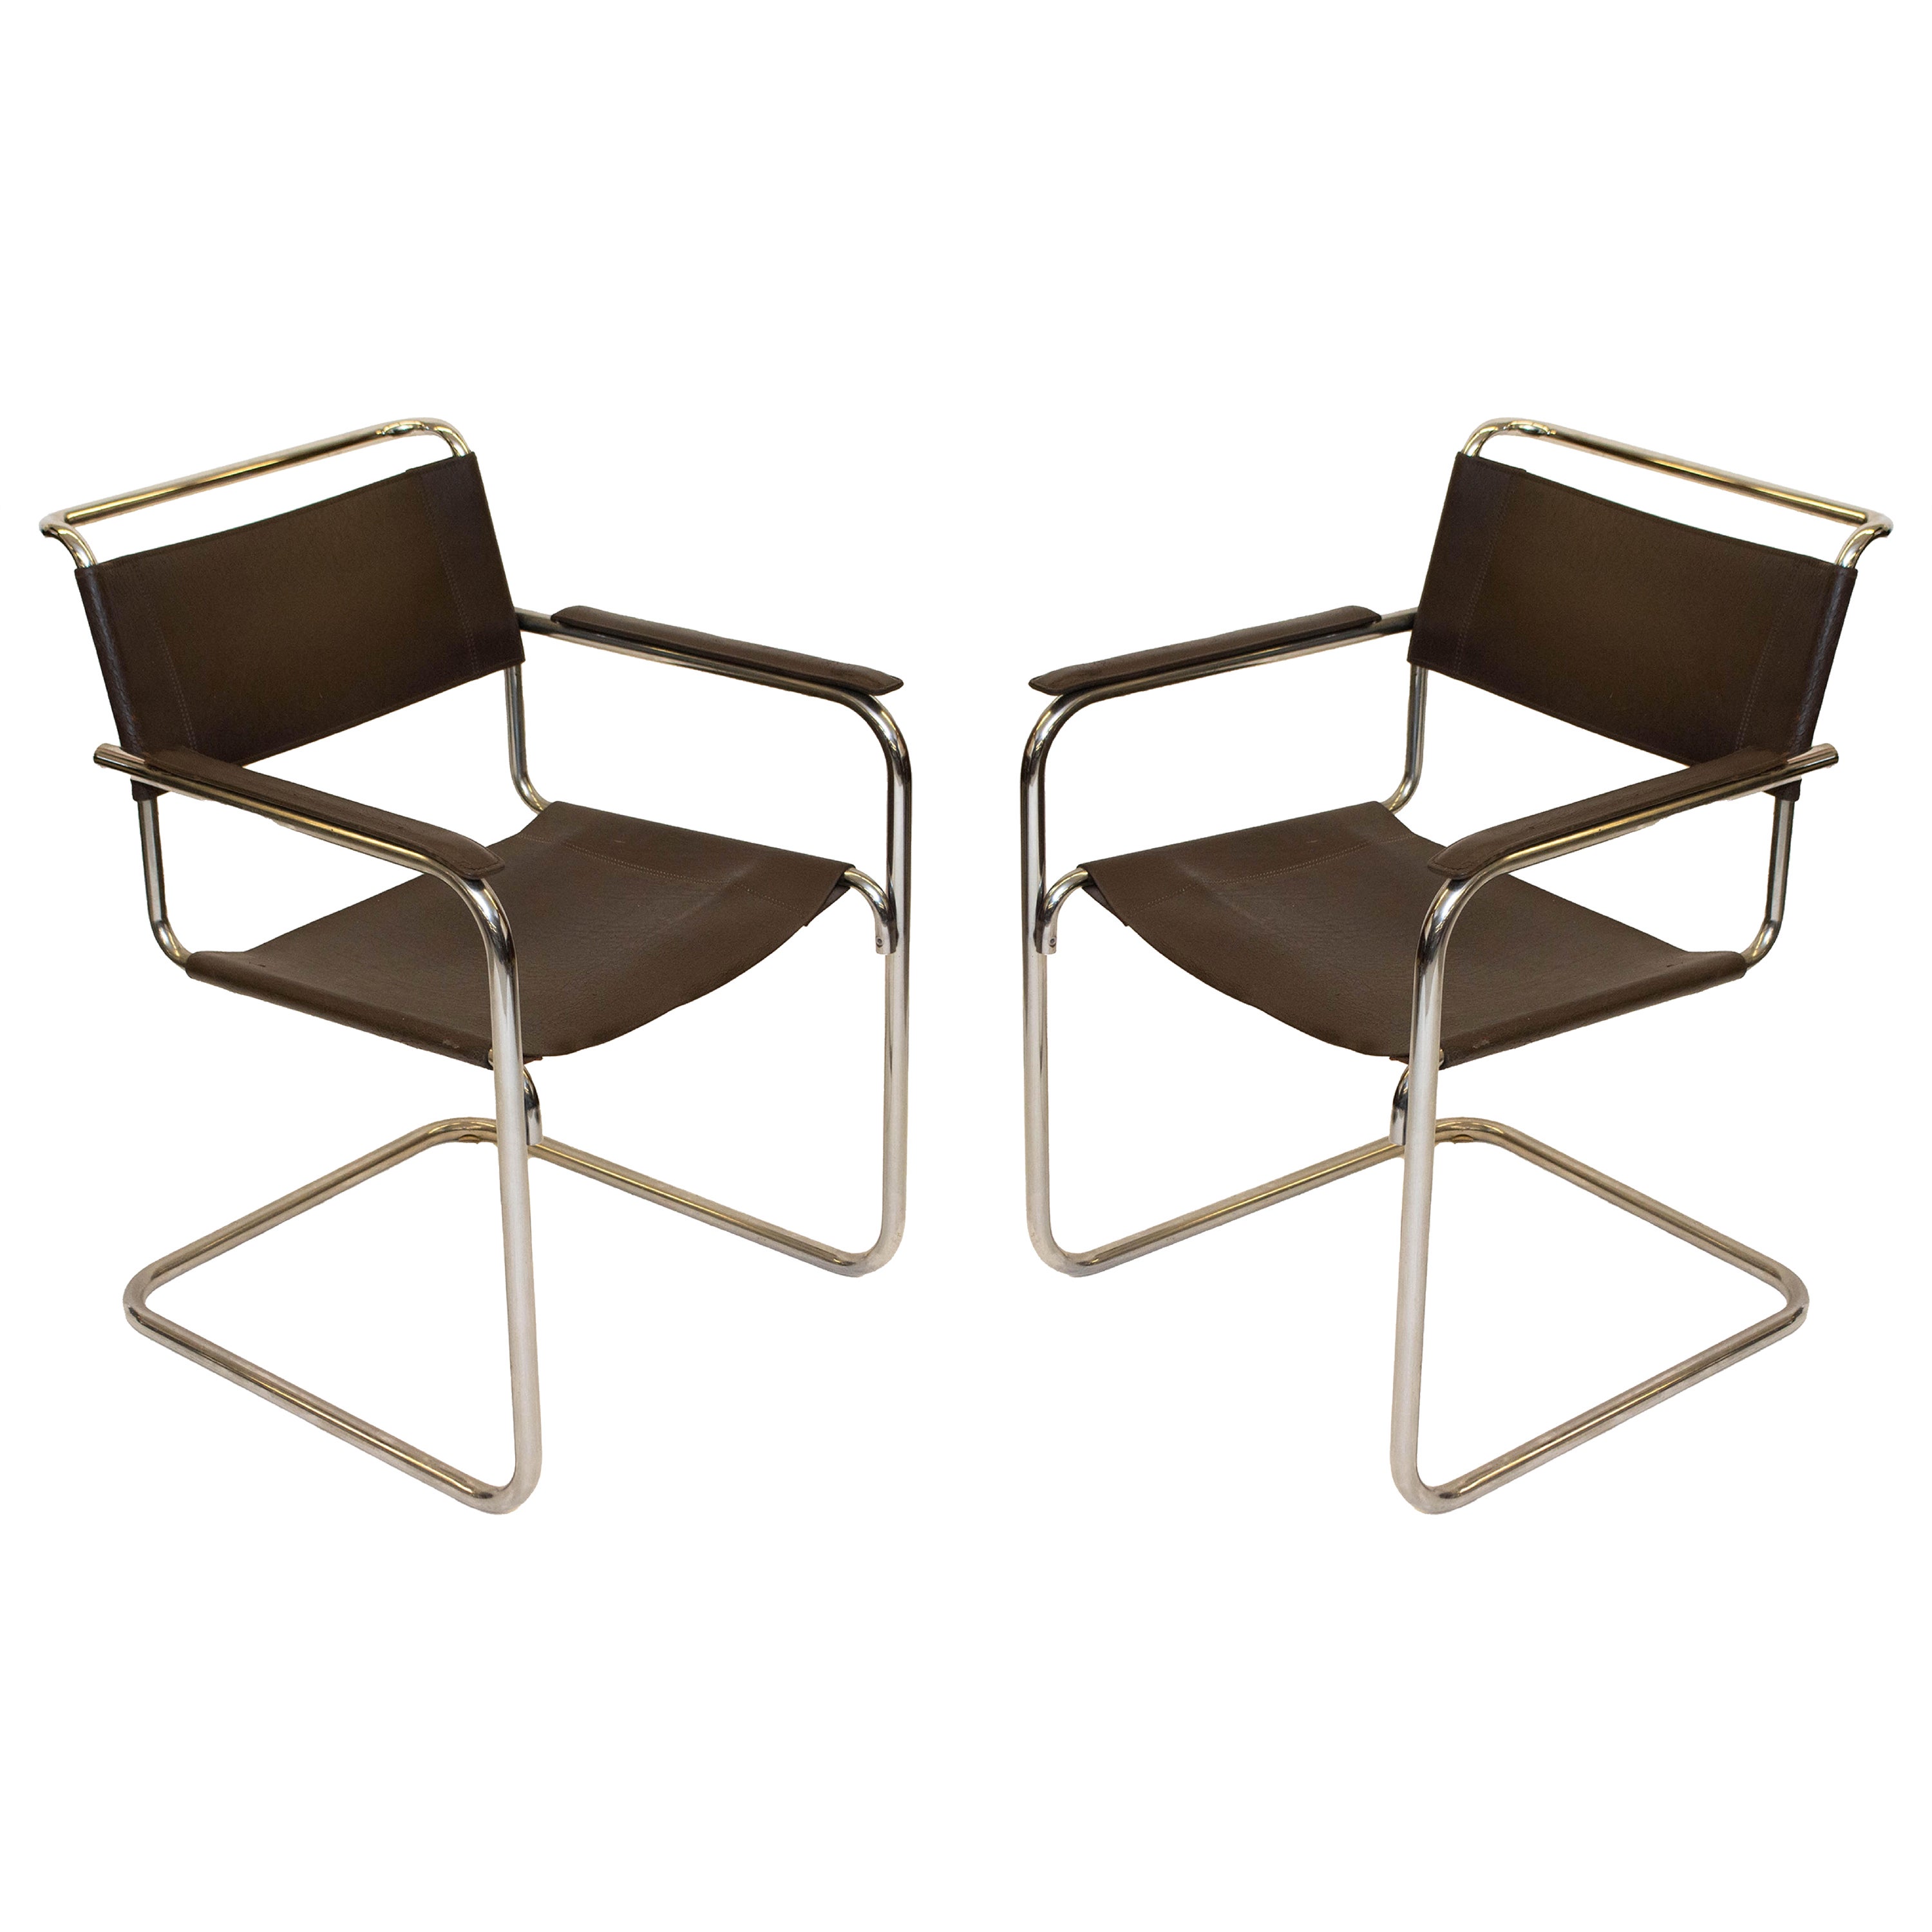 B34 Bauhaus Leather Arm Chairs by Marcel Breuer, Pair